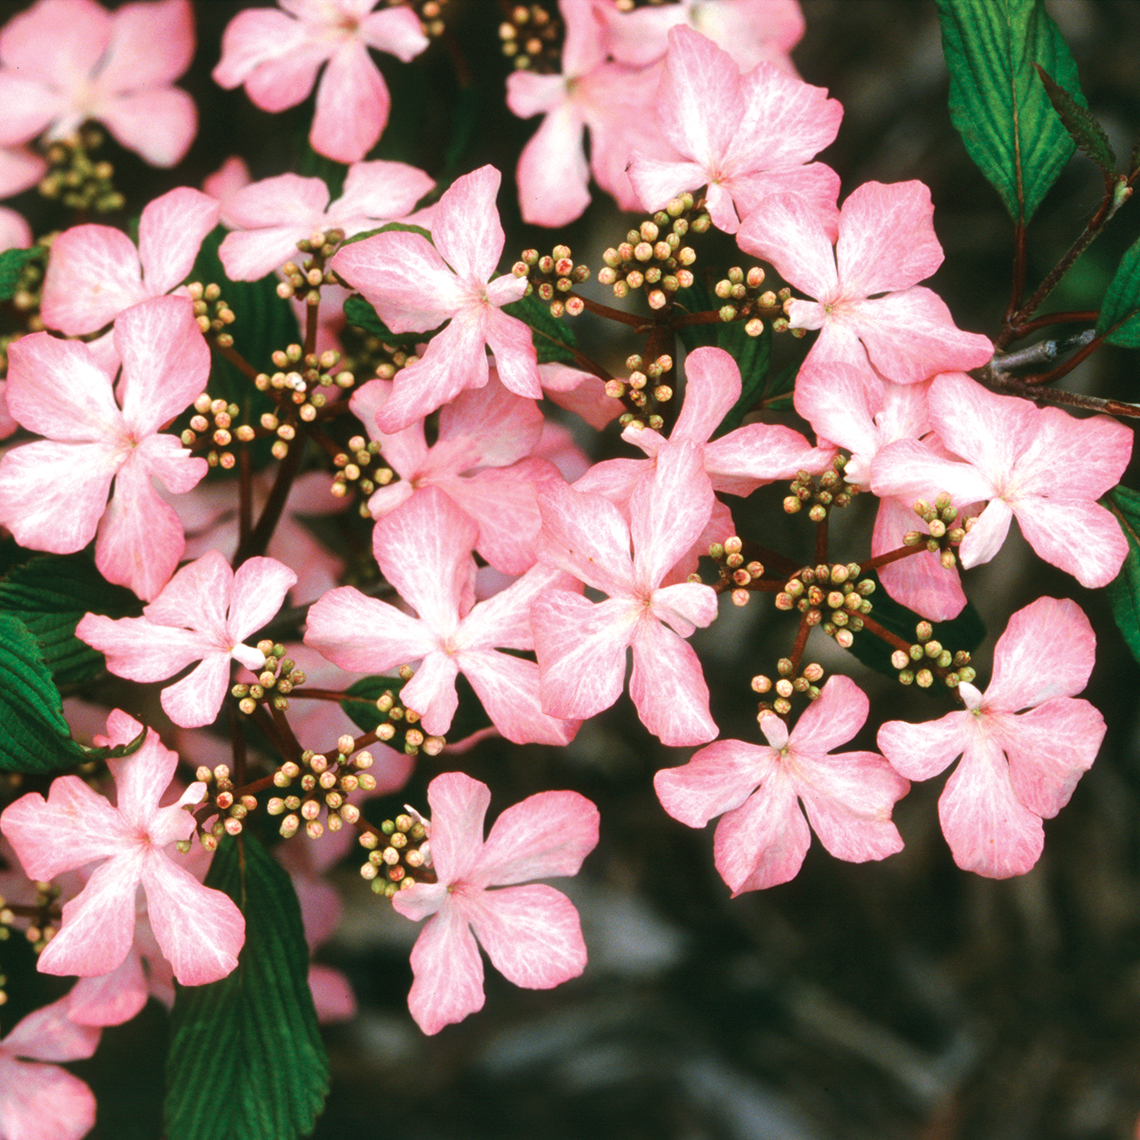 Closeup of the beautiful pink lacecap flowers of Molly Schroeder doublefile viburnum